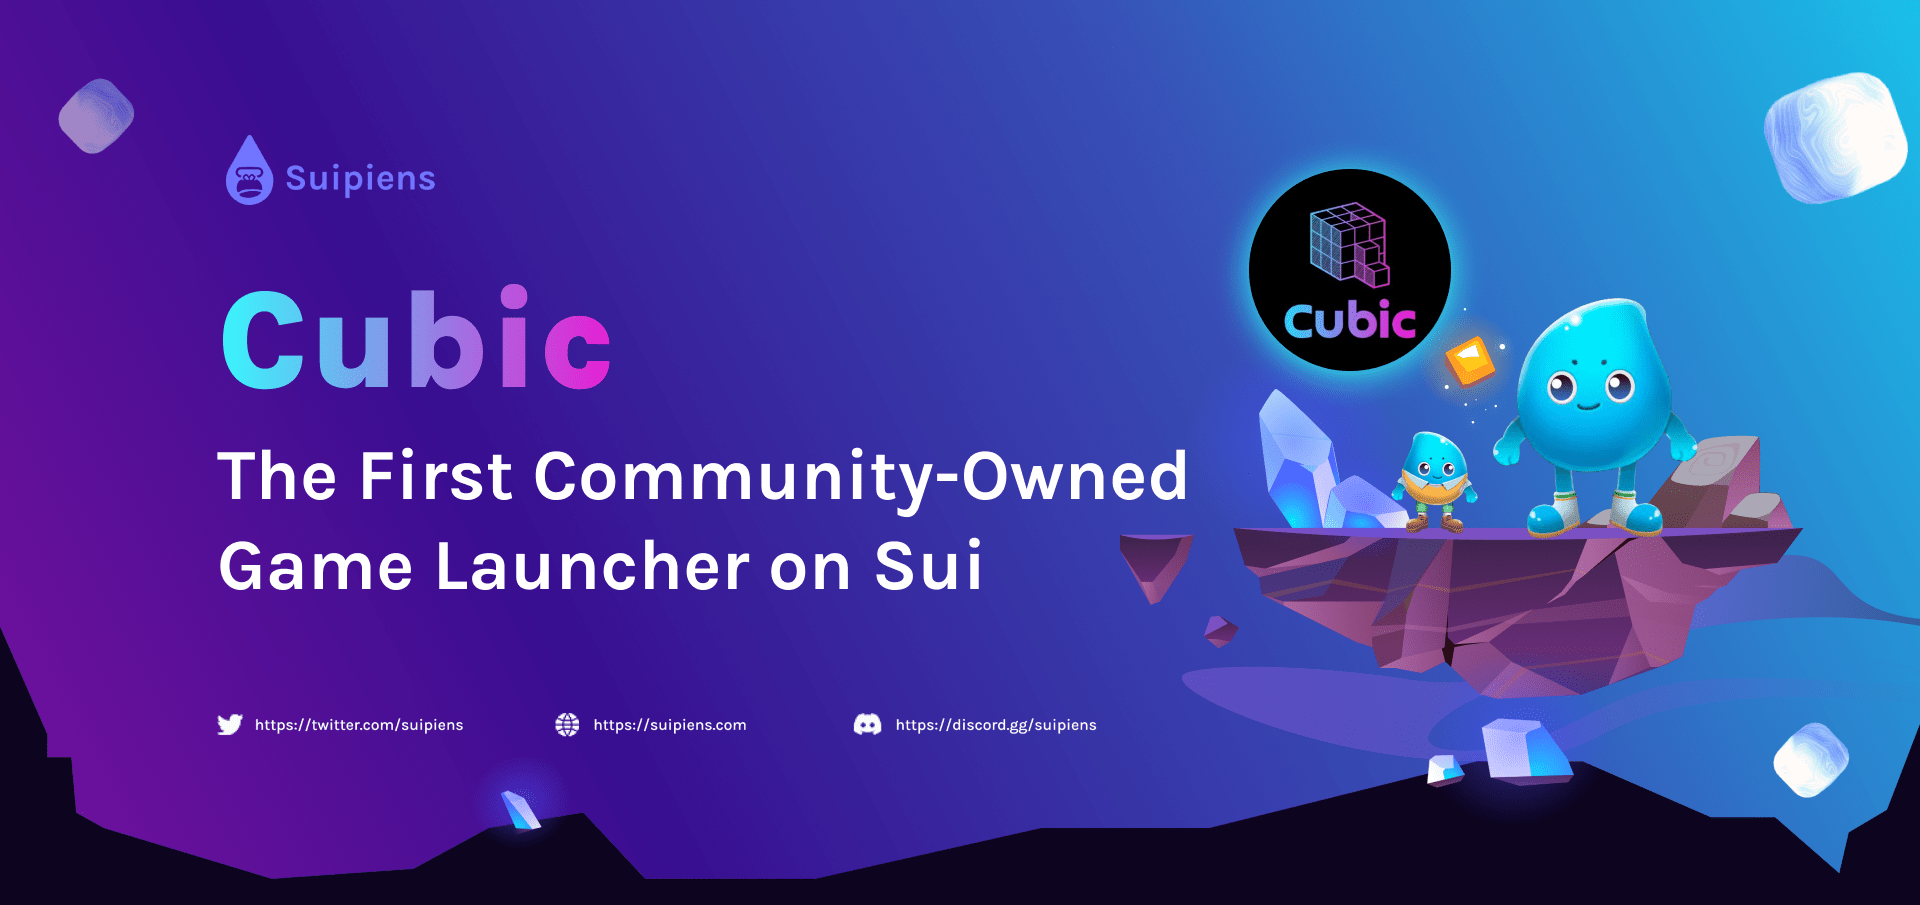 Cubic: The First Community-Owned Game Launcher on Sui